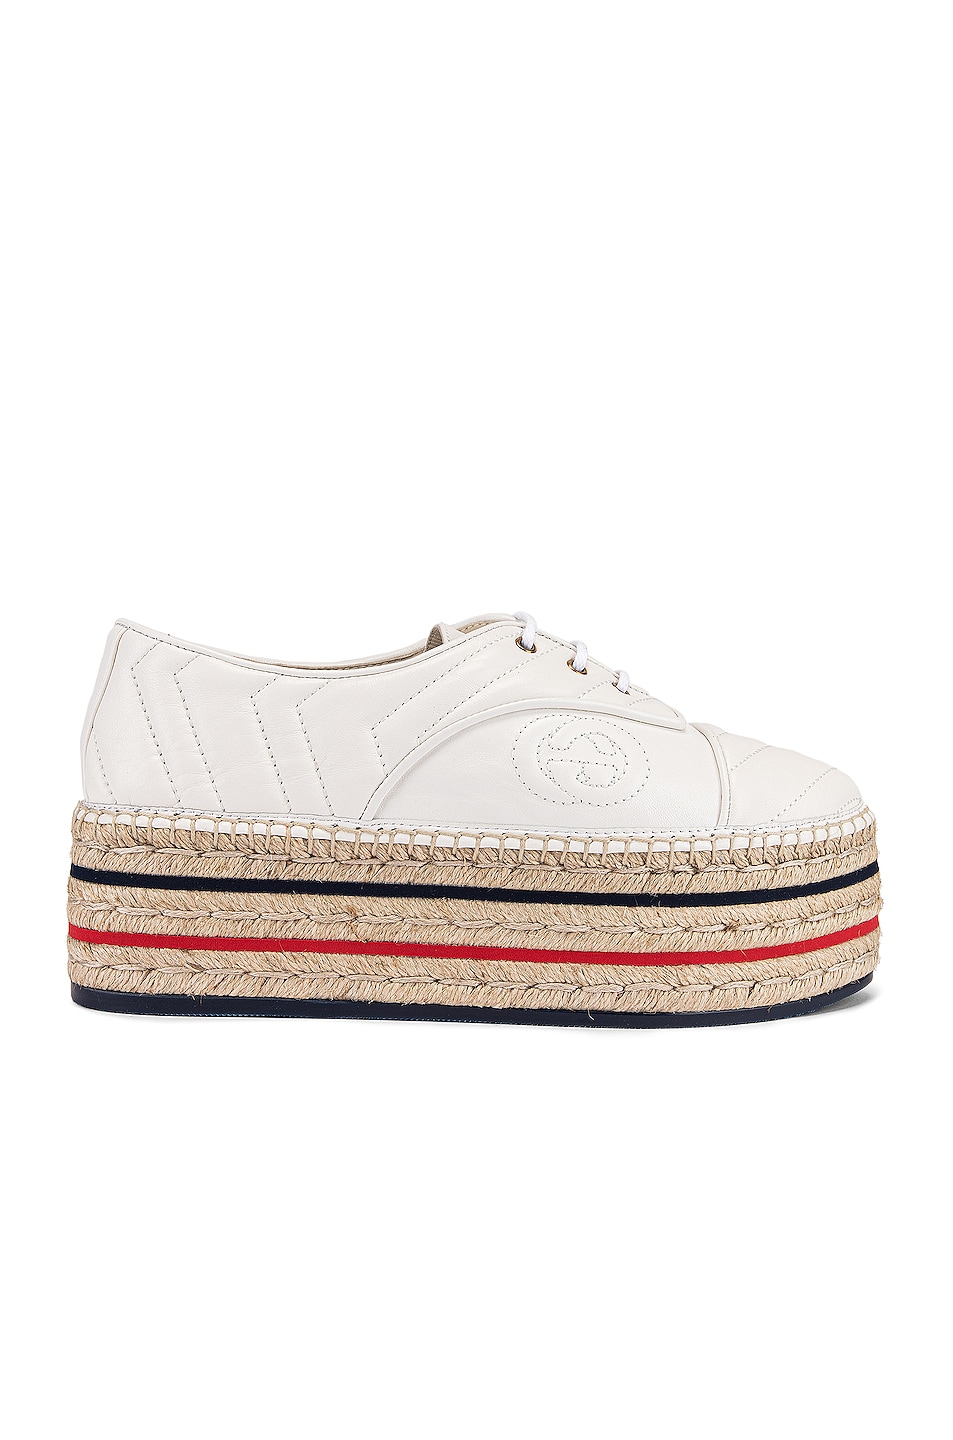 Image 1 of Gucci Pilar Platform Sneakers in Great White